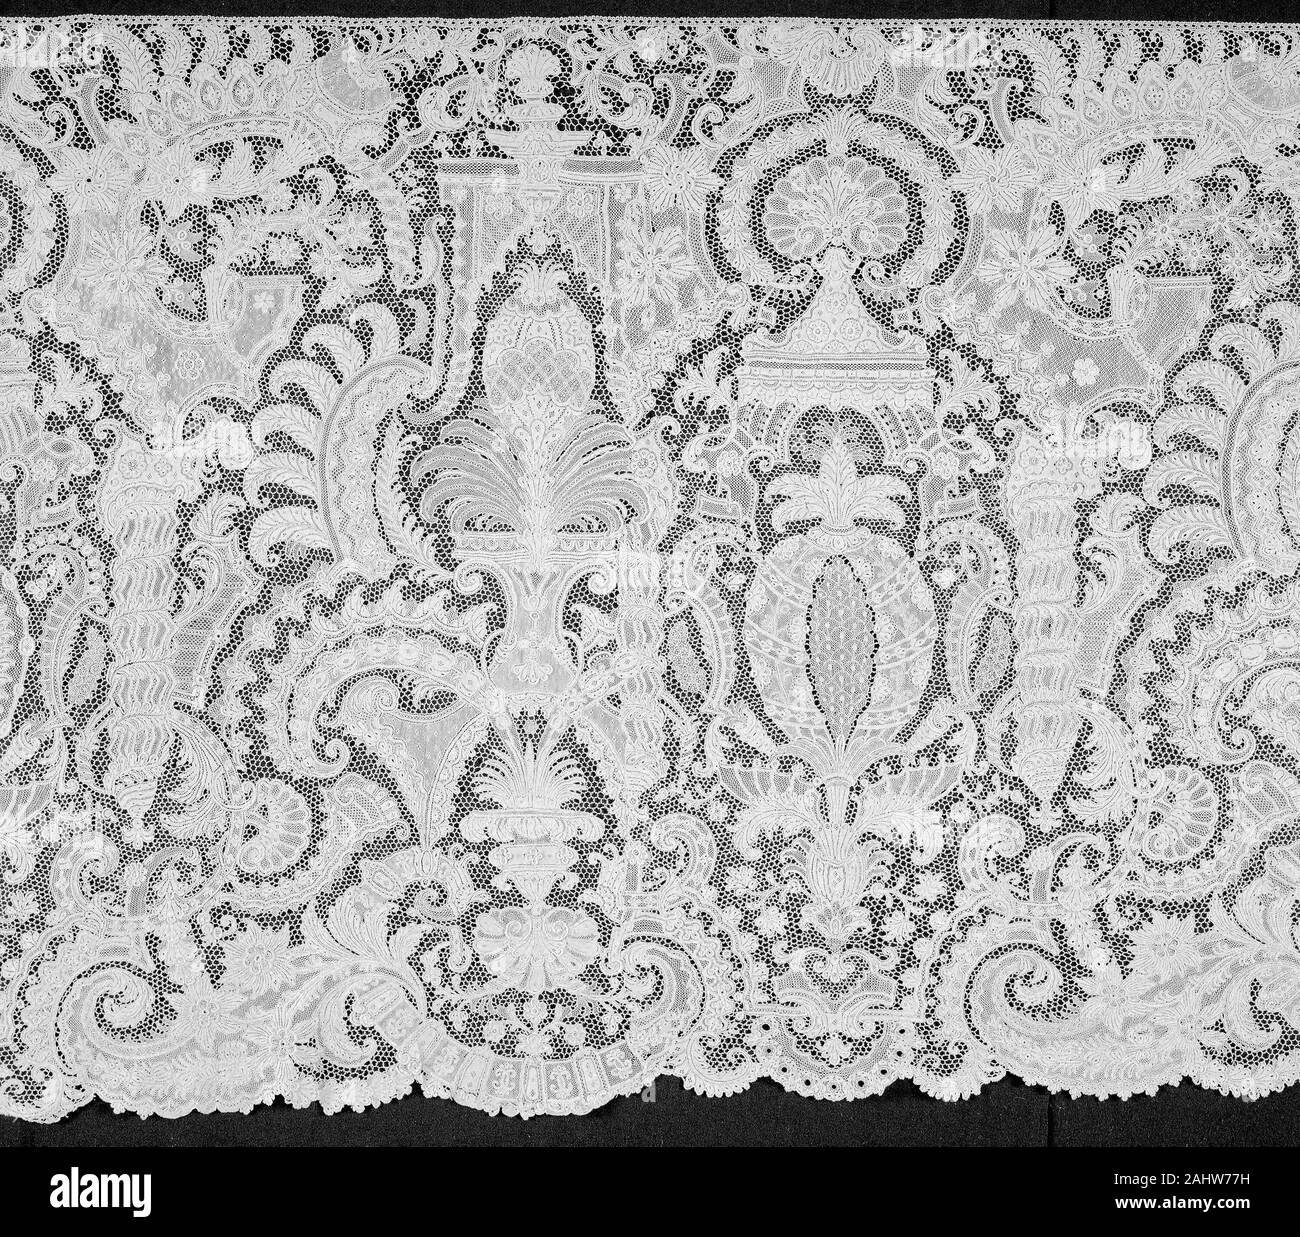 Lace flounce Black and White Stock Photos & Images - Alamy